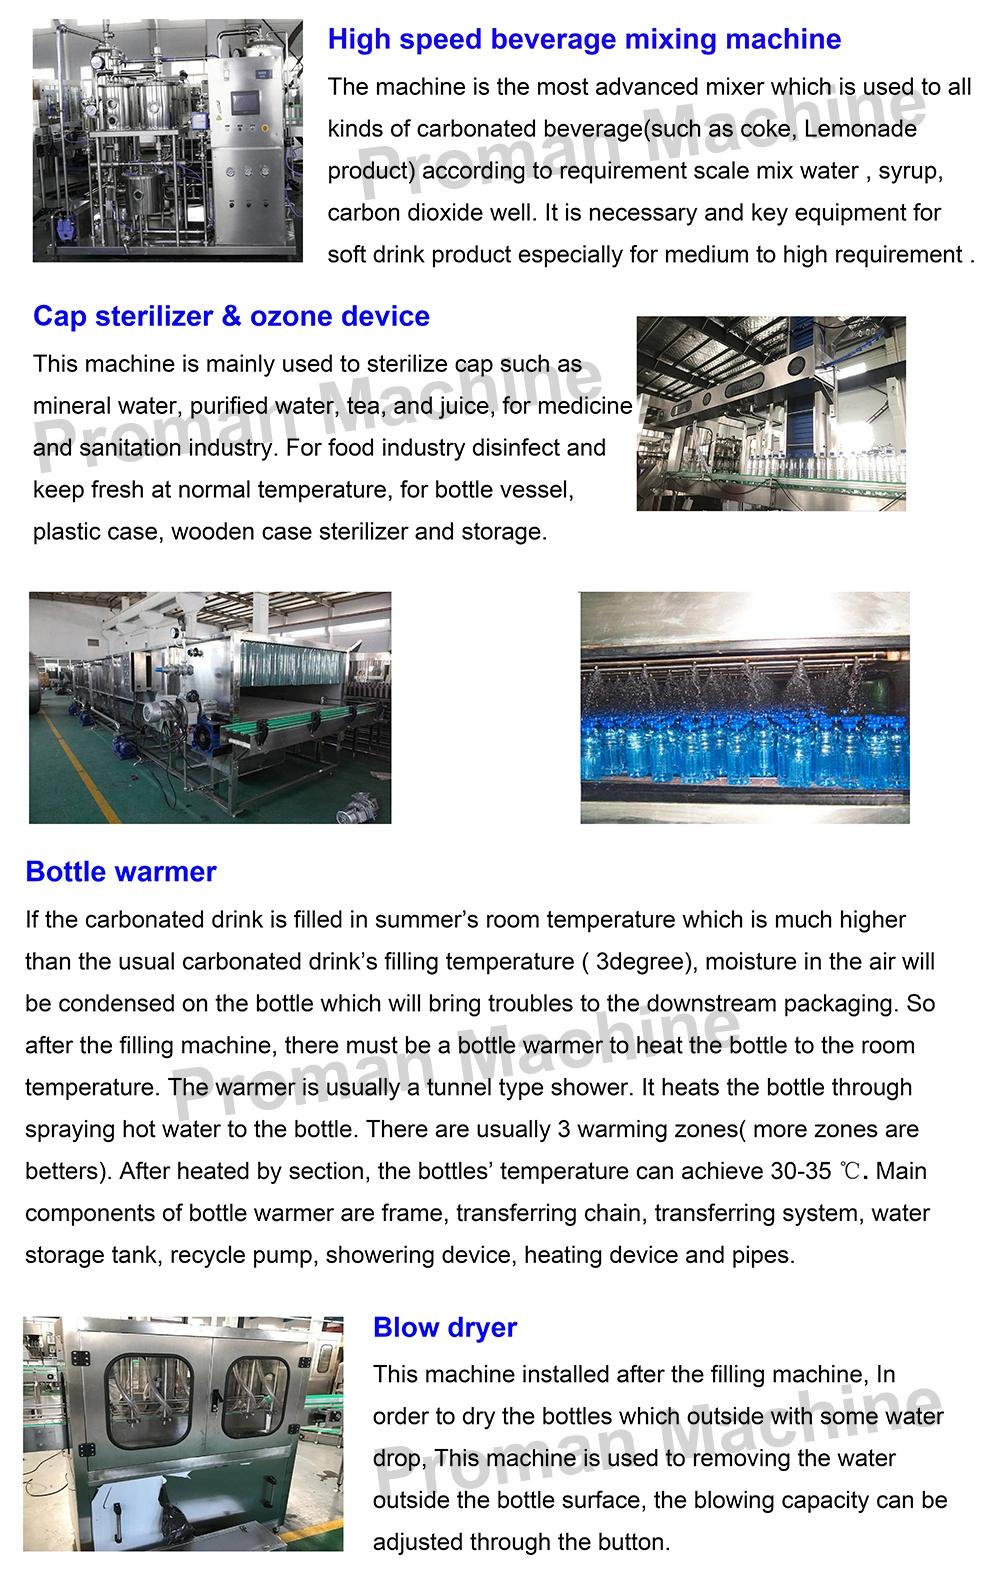 Automatic Industrial Use Spraying Bottle Warmer for Carbonated Drink Filling Production Line